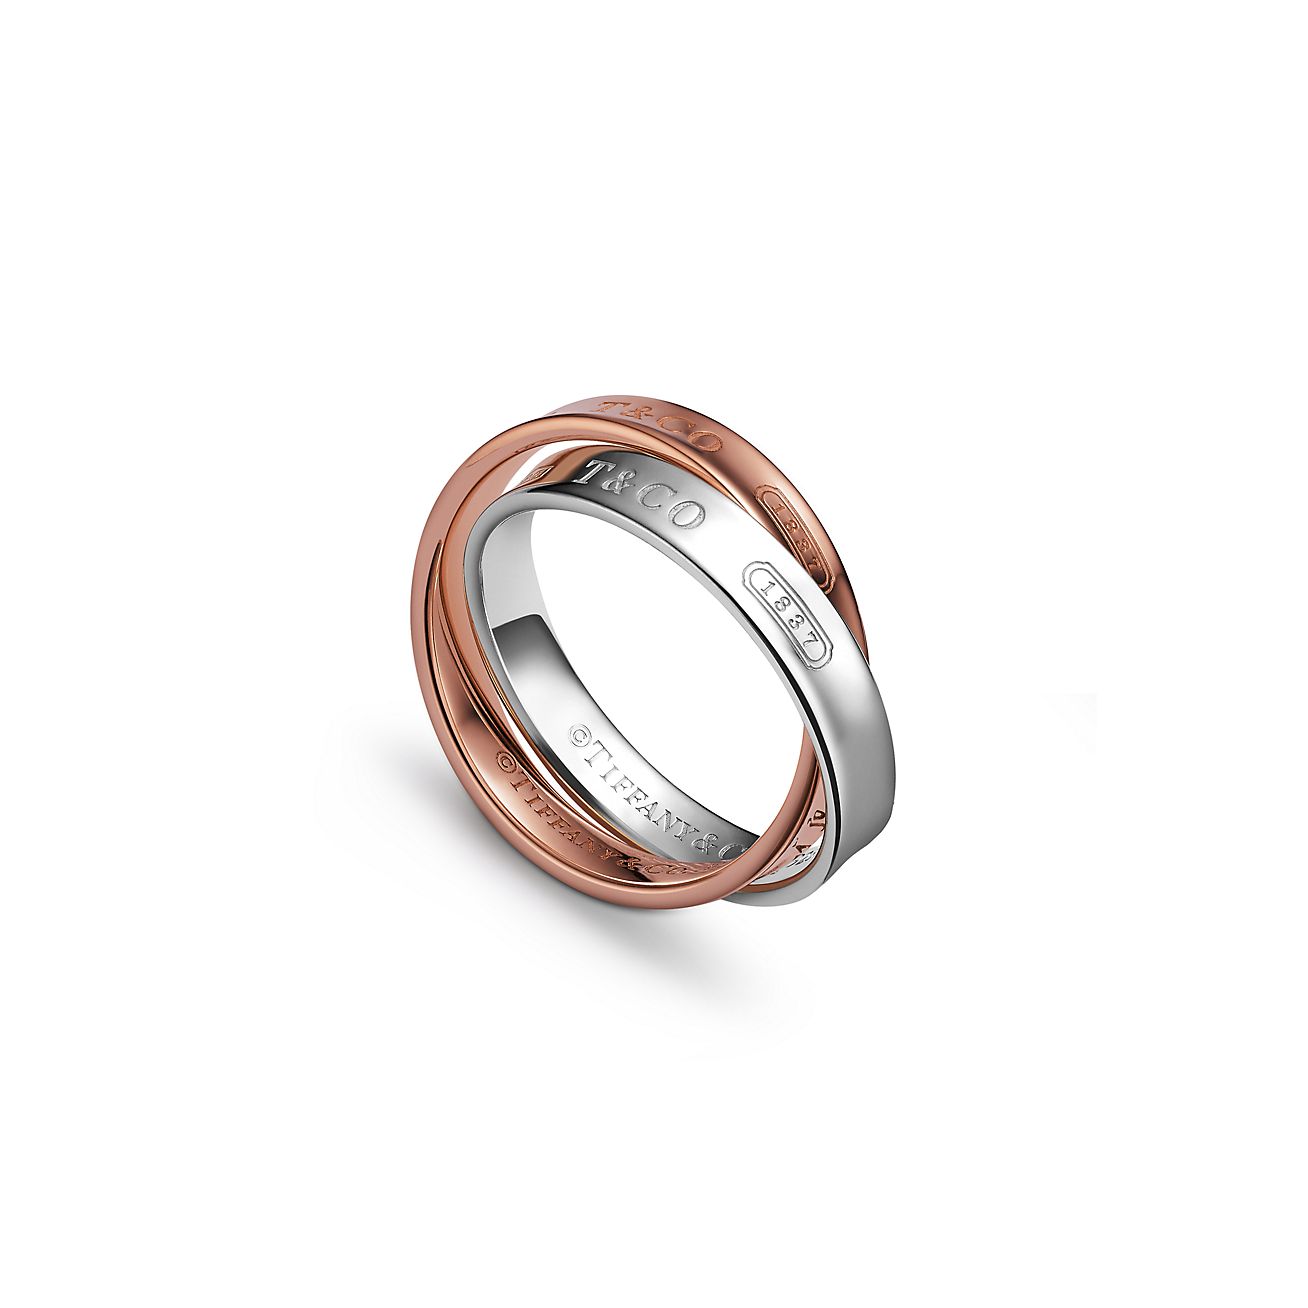 Tiffany 1837® Interlocking Circles Ring in Rose Gold and Sterling